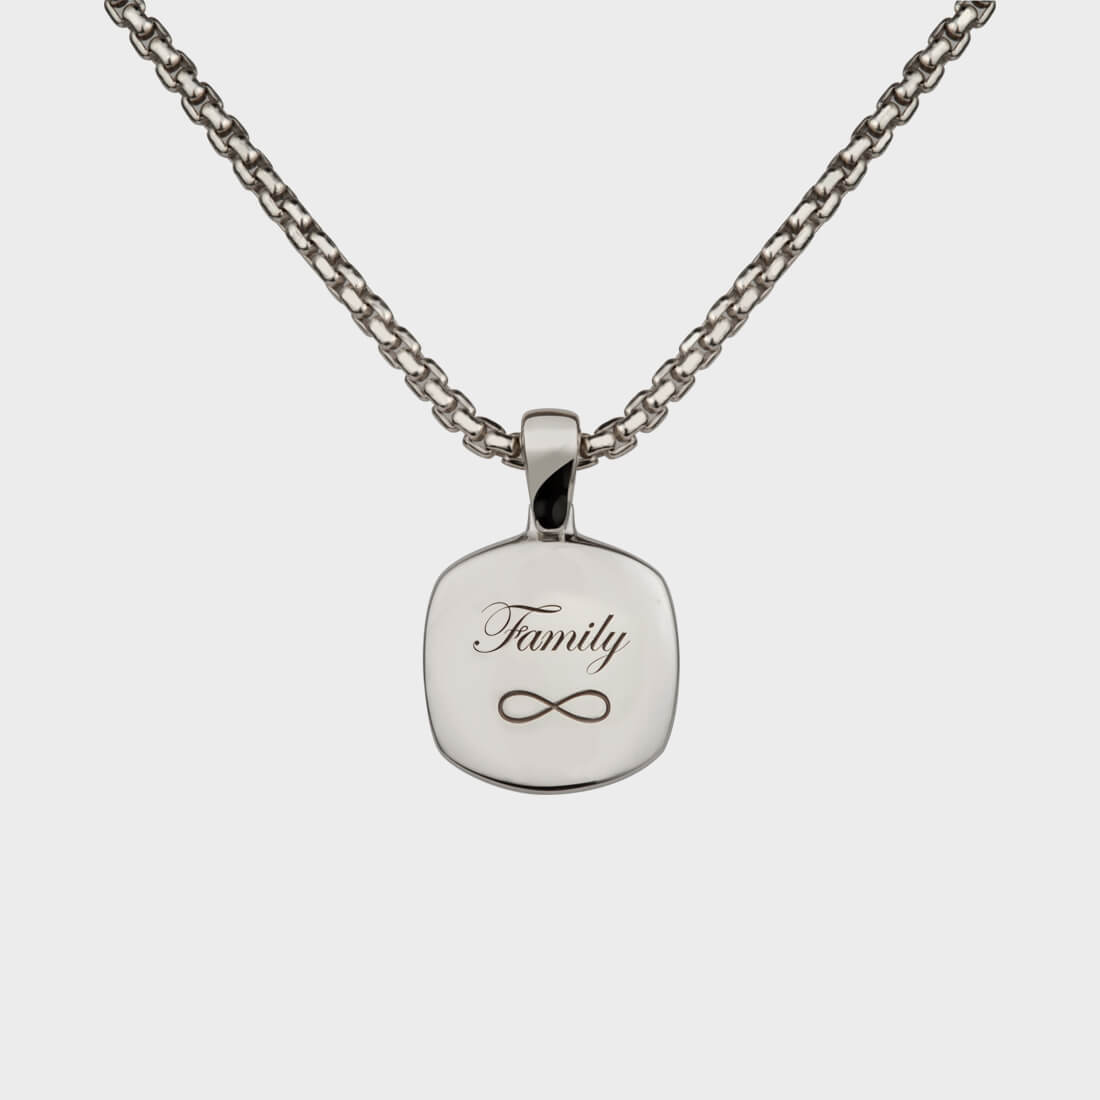 A sterling silver signet necklace with the word 'family' and the infinity sign engraved on it at the back